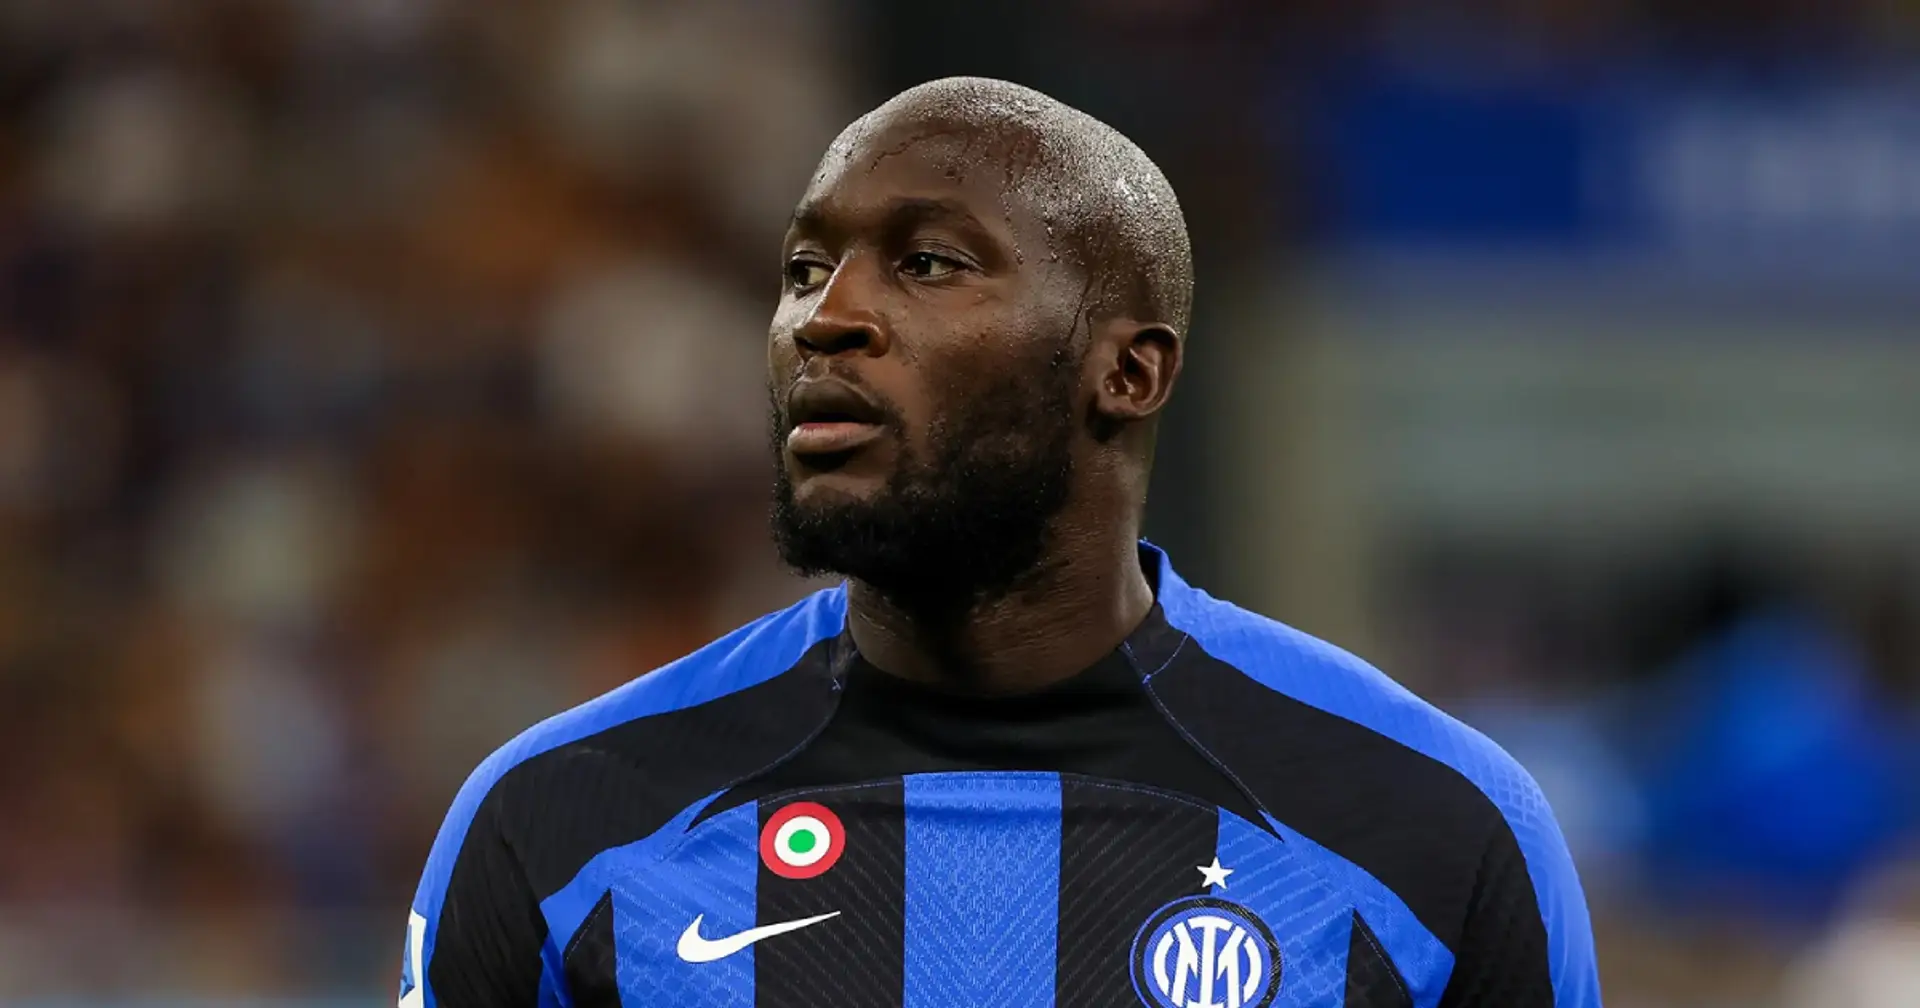 Chelsea want to sell Lukaku, hope for good World Cup to boost his value (reliability: 4 stars)